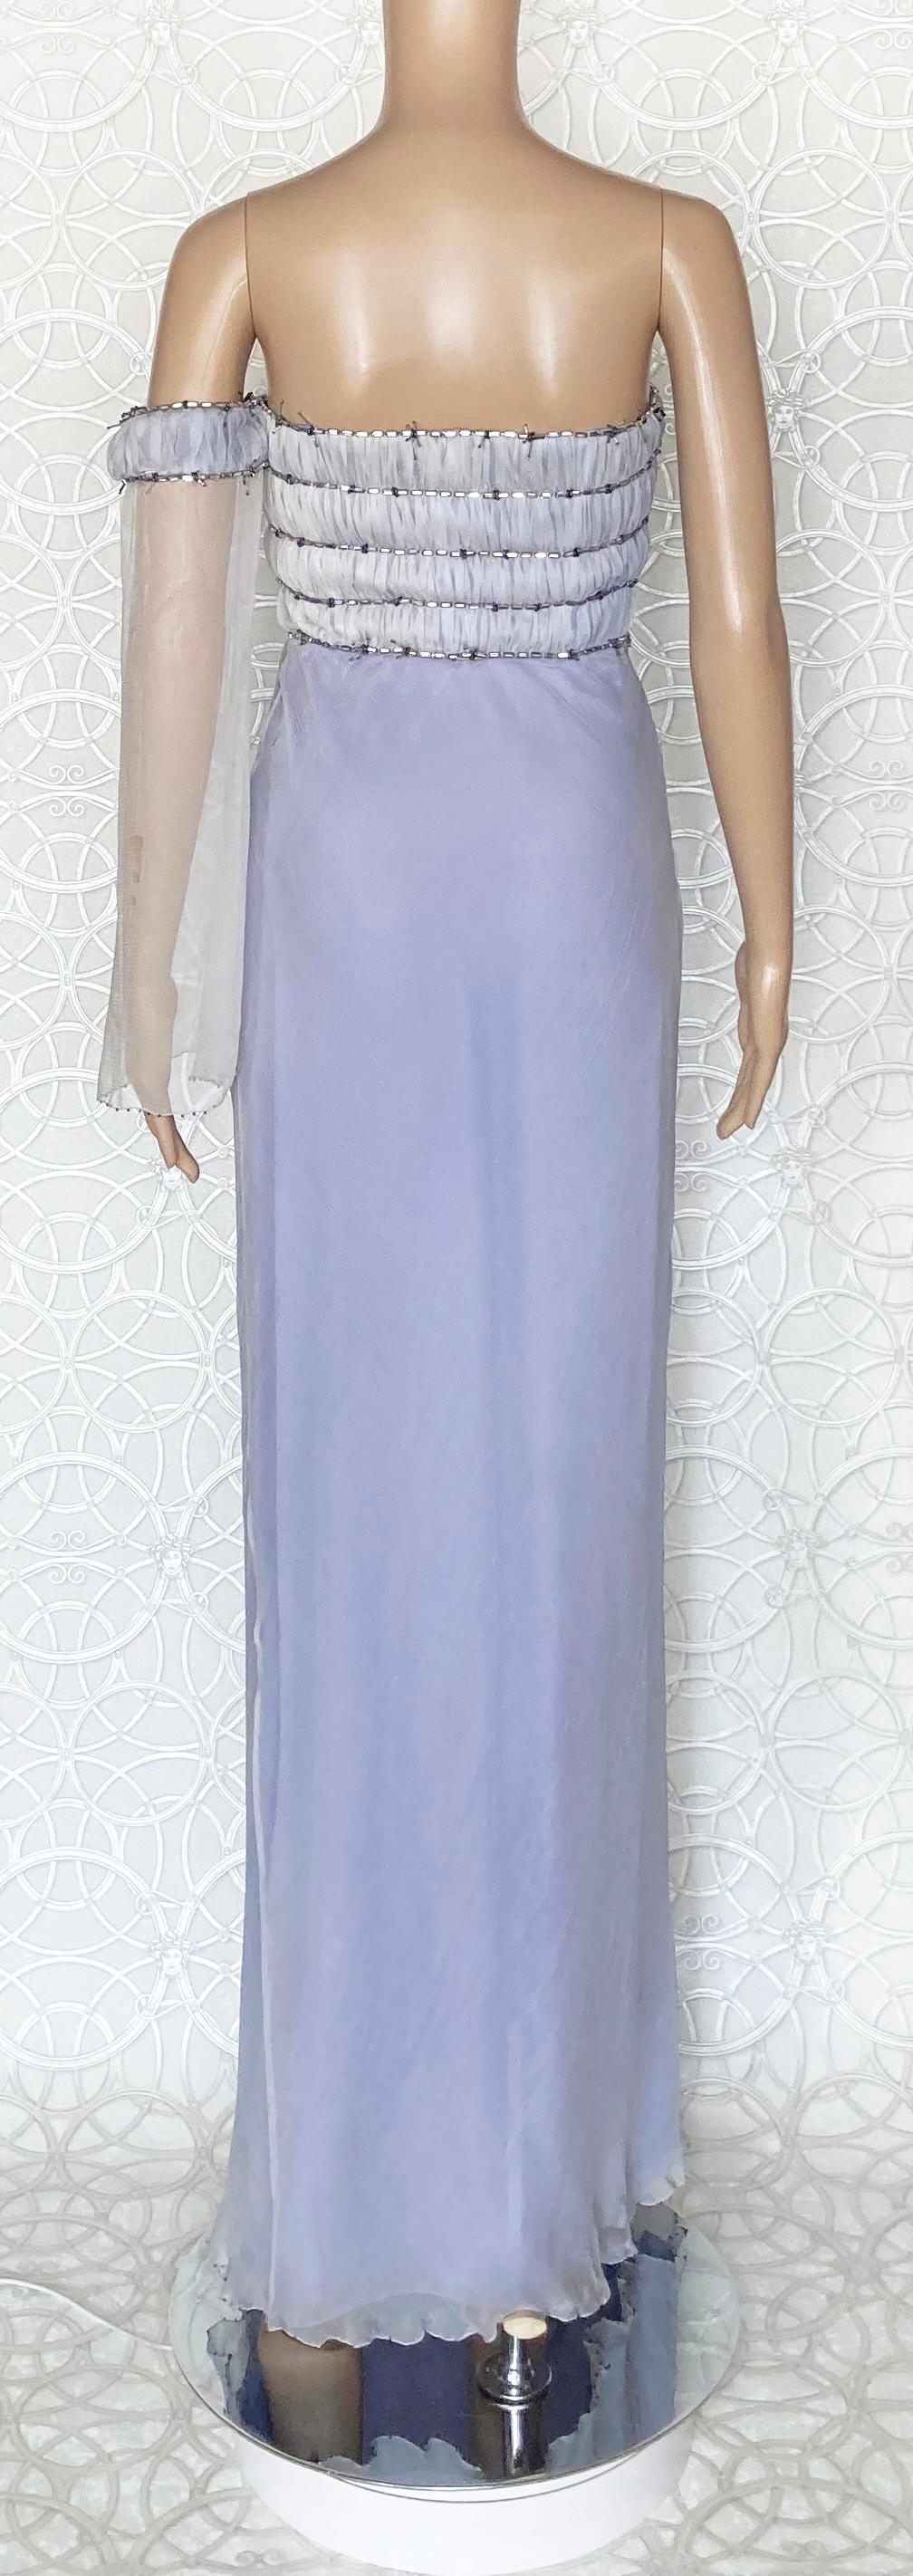 F/W 1998 VINTAGE GIANNI VERSACE COUTURE LILAC Dress 38 - 2 1